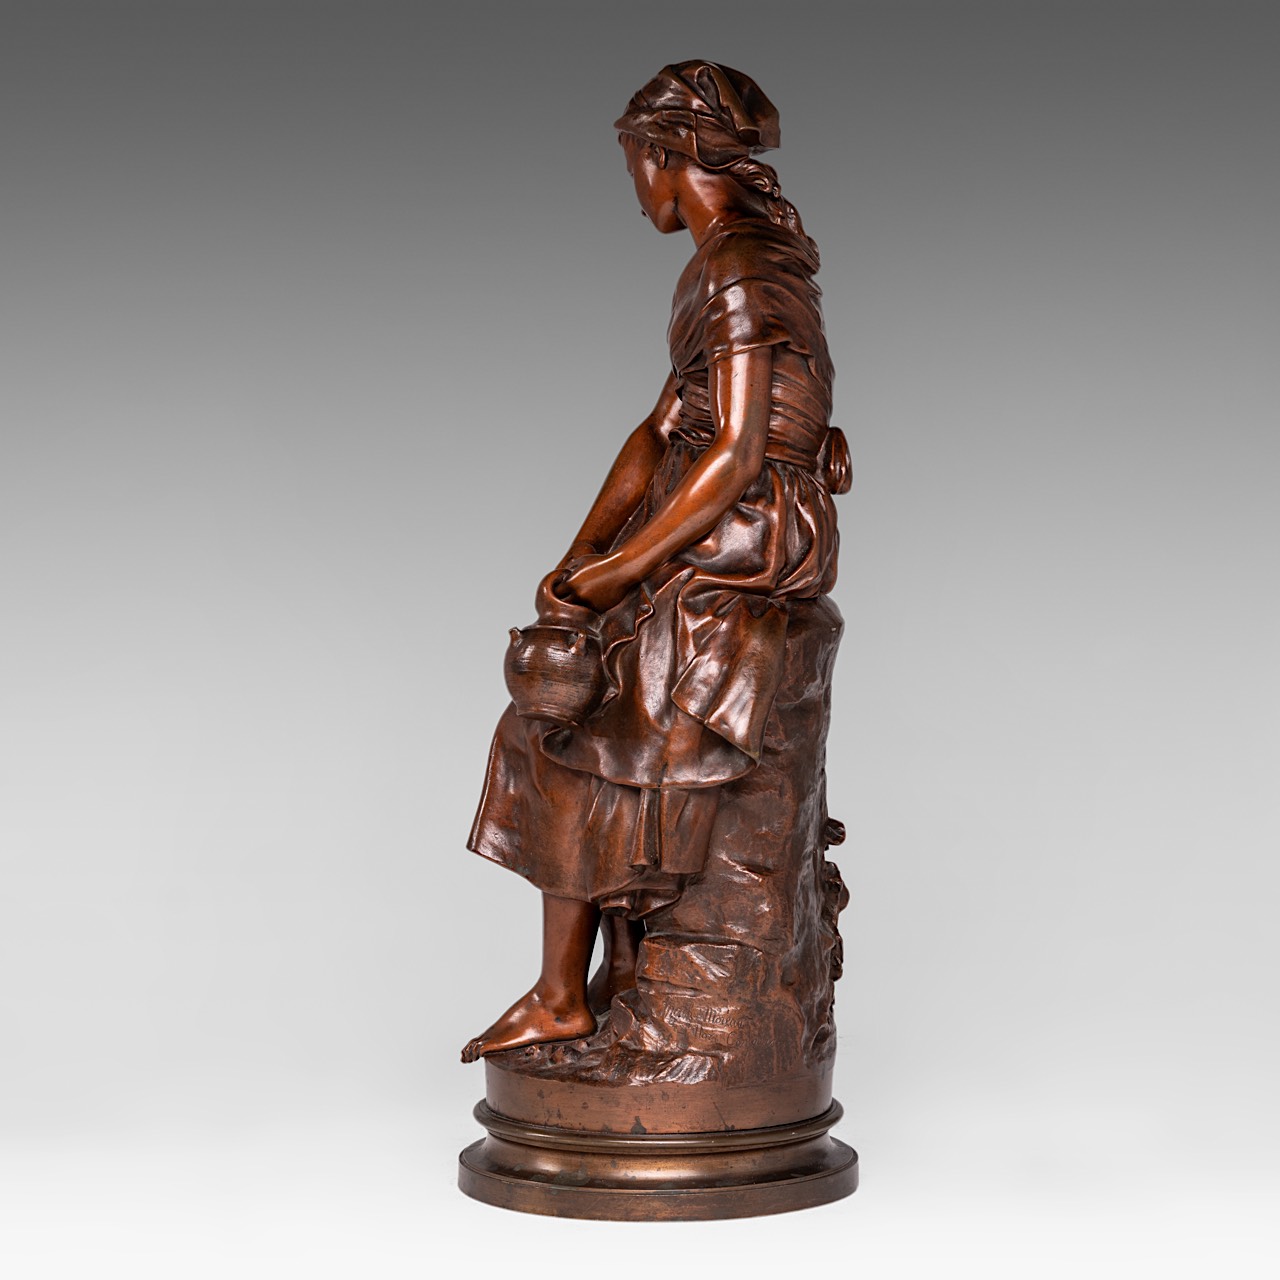 Mathurin Moreau (1822-1912), young girl with a jug, patinated bronze, foundry mark of E. Godeau, Par - Image 3 of 8